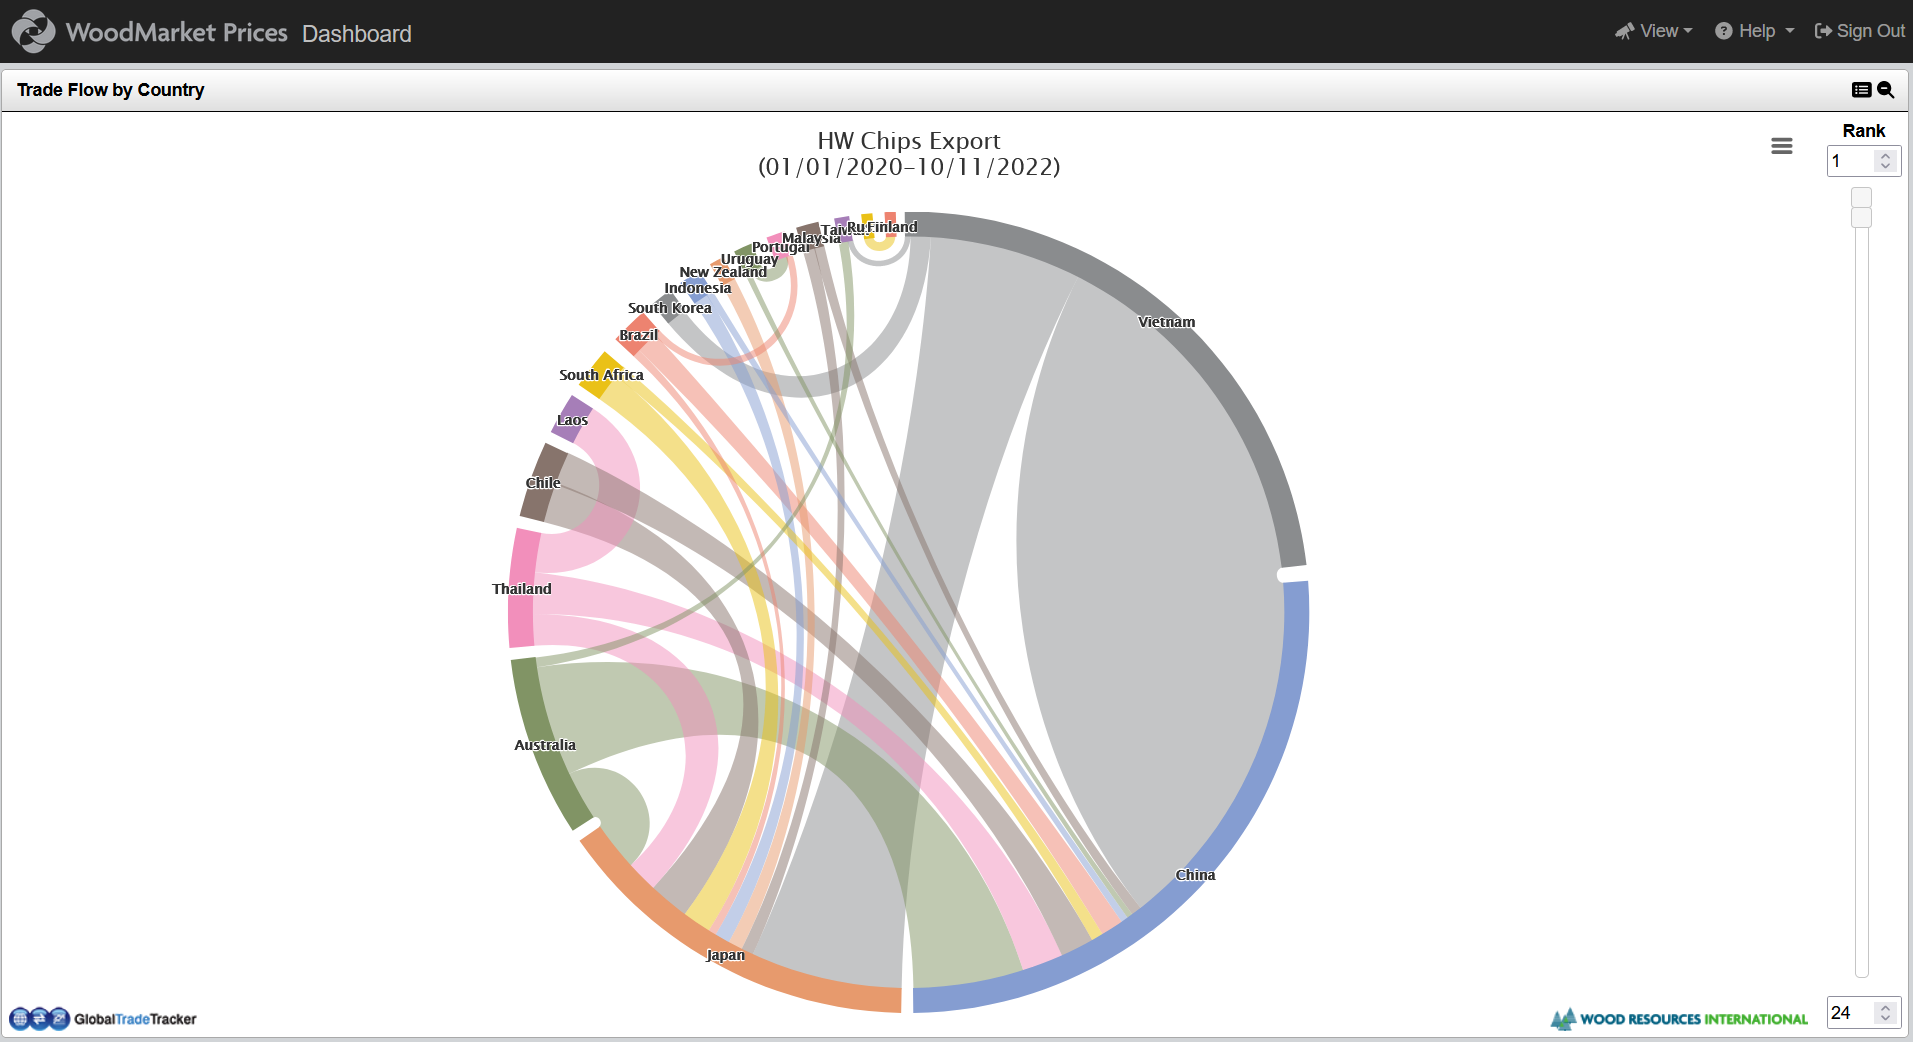 Trade flow wheel showing export data that is traceable from country to country.